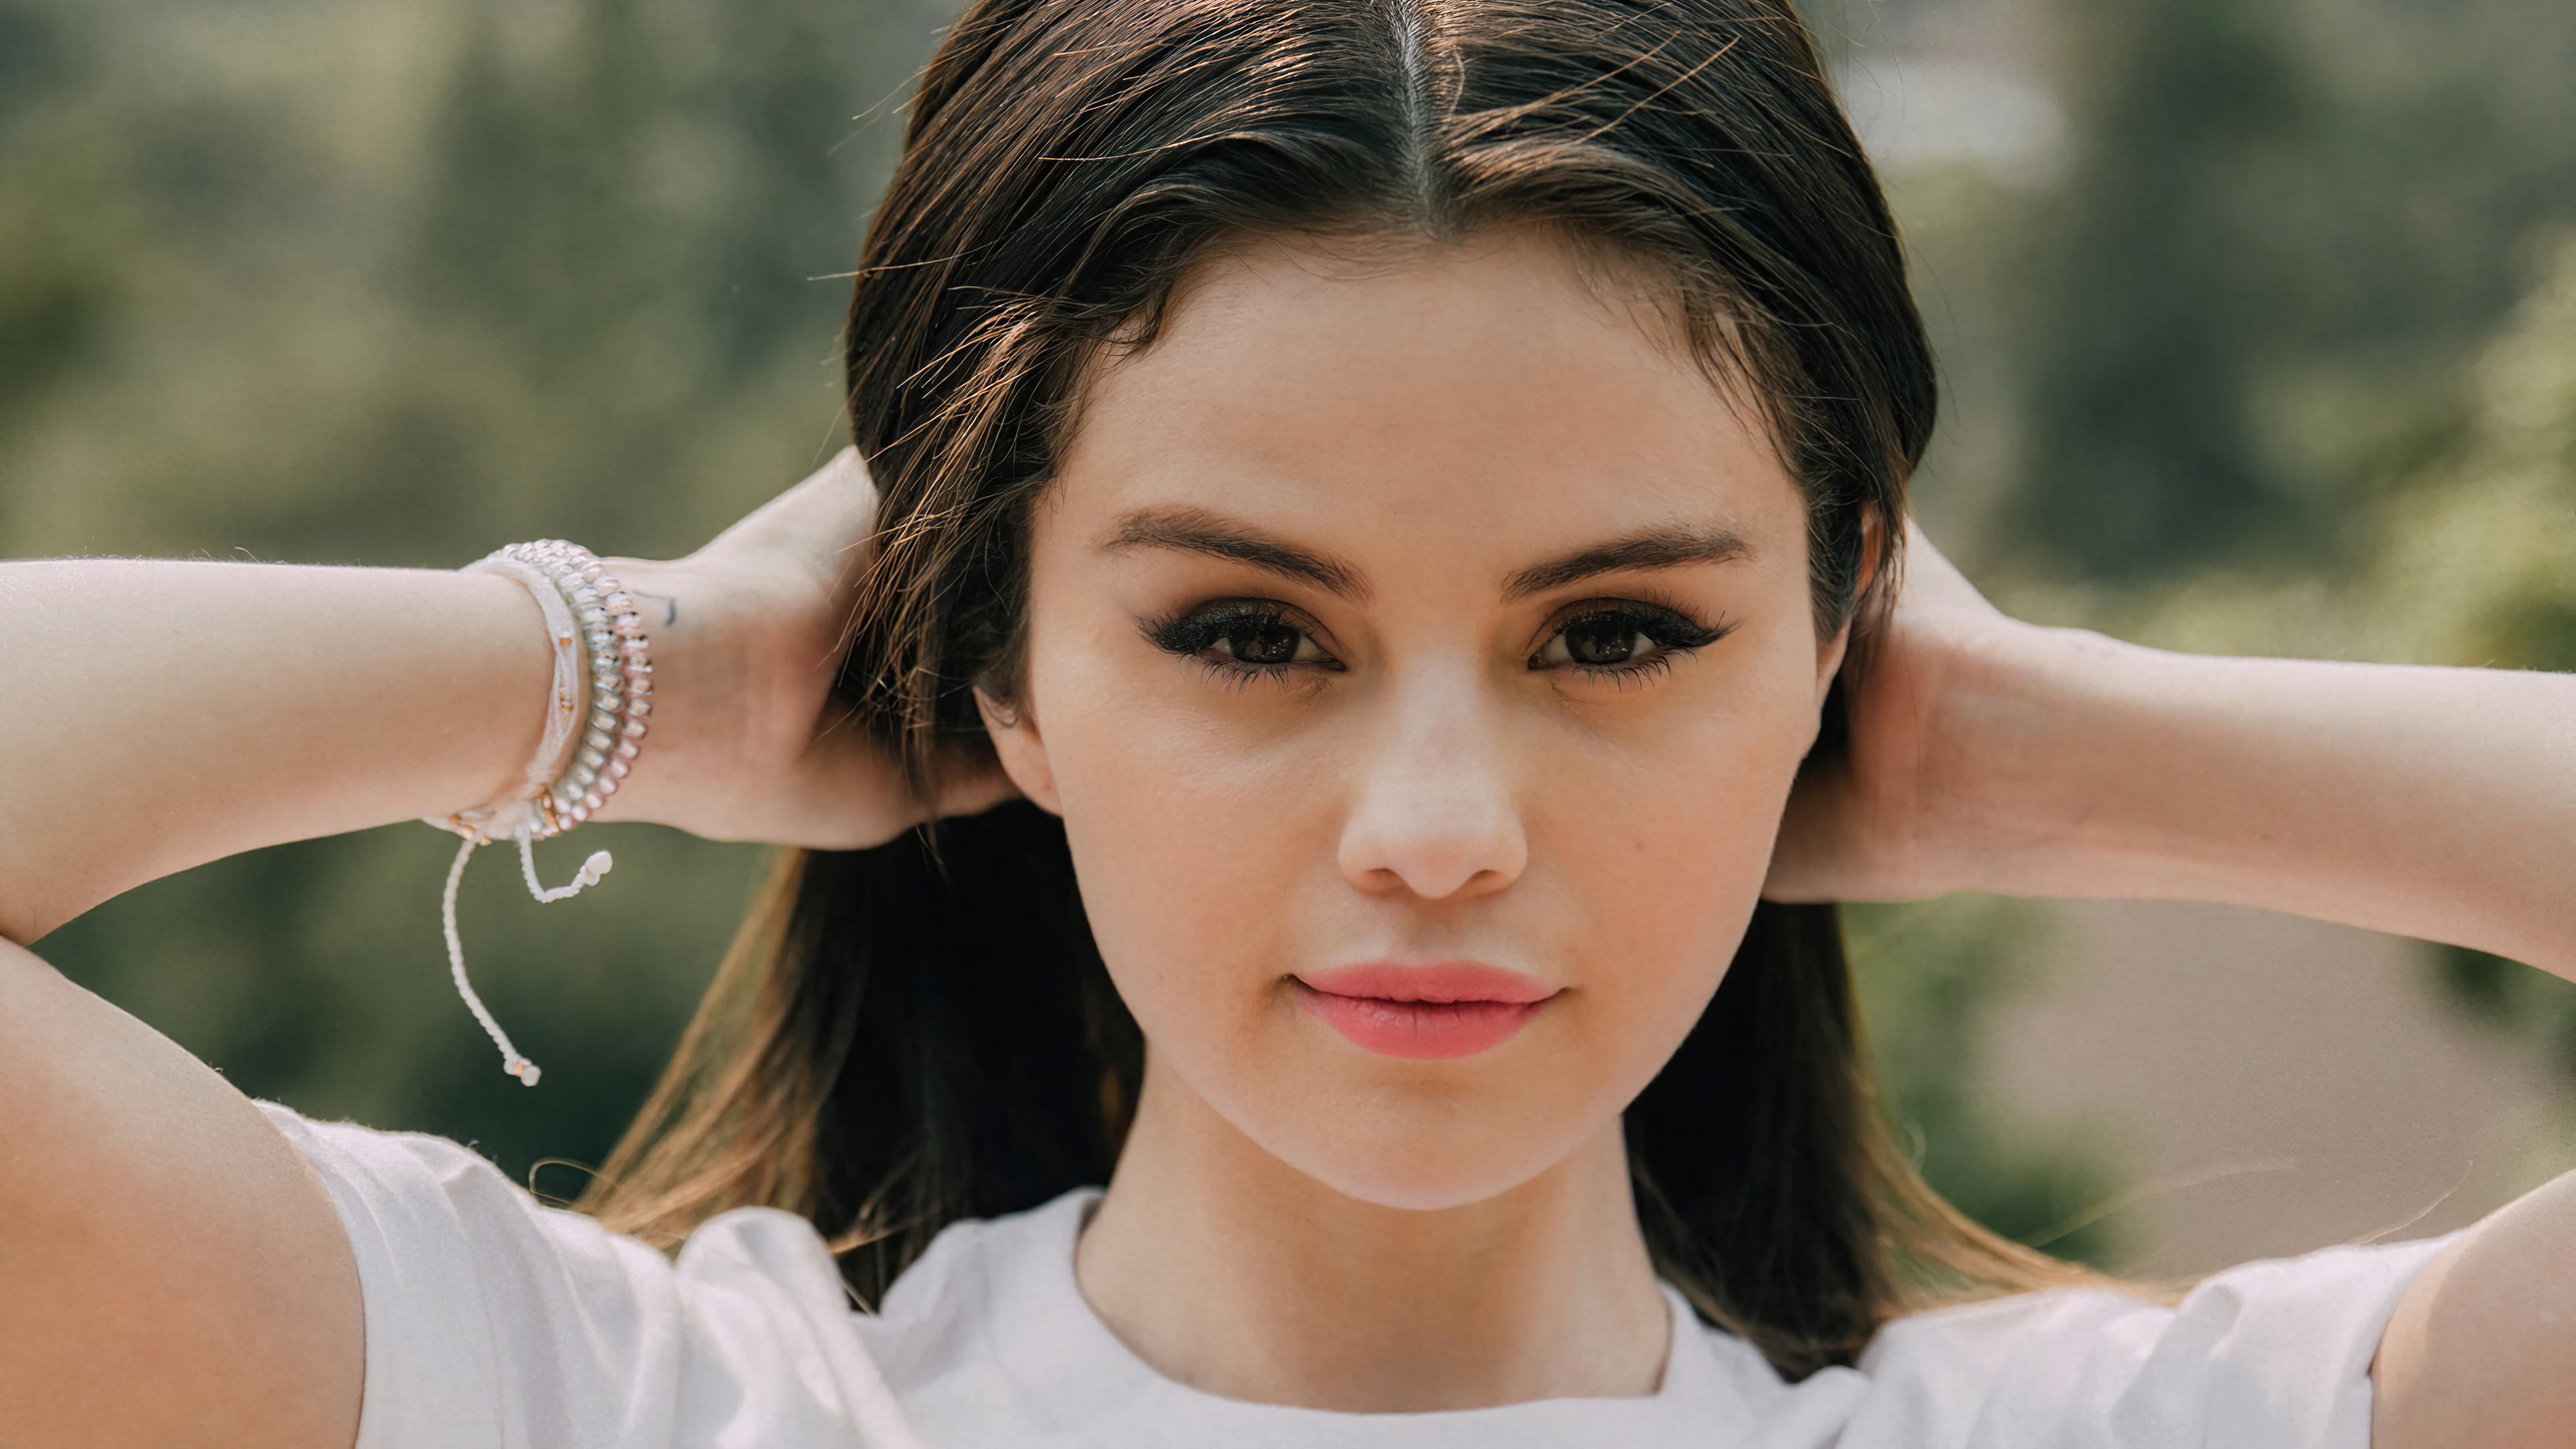 4K Selena Gomez without Makeup Wallpapers